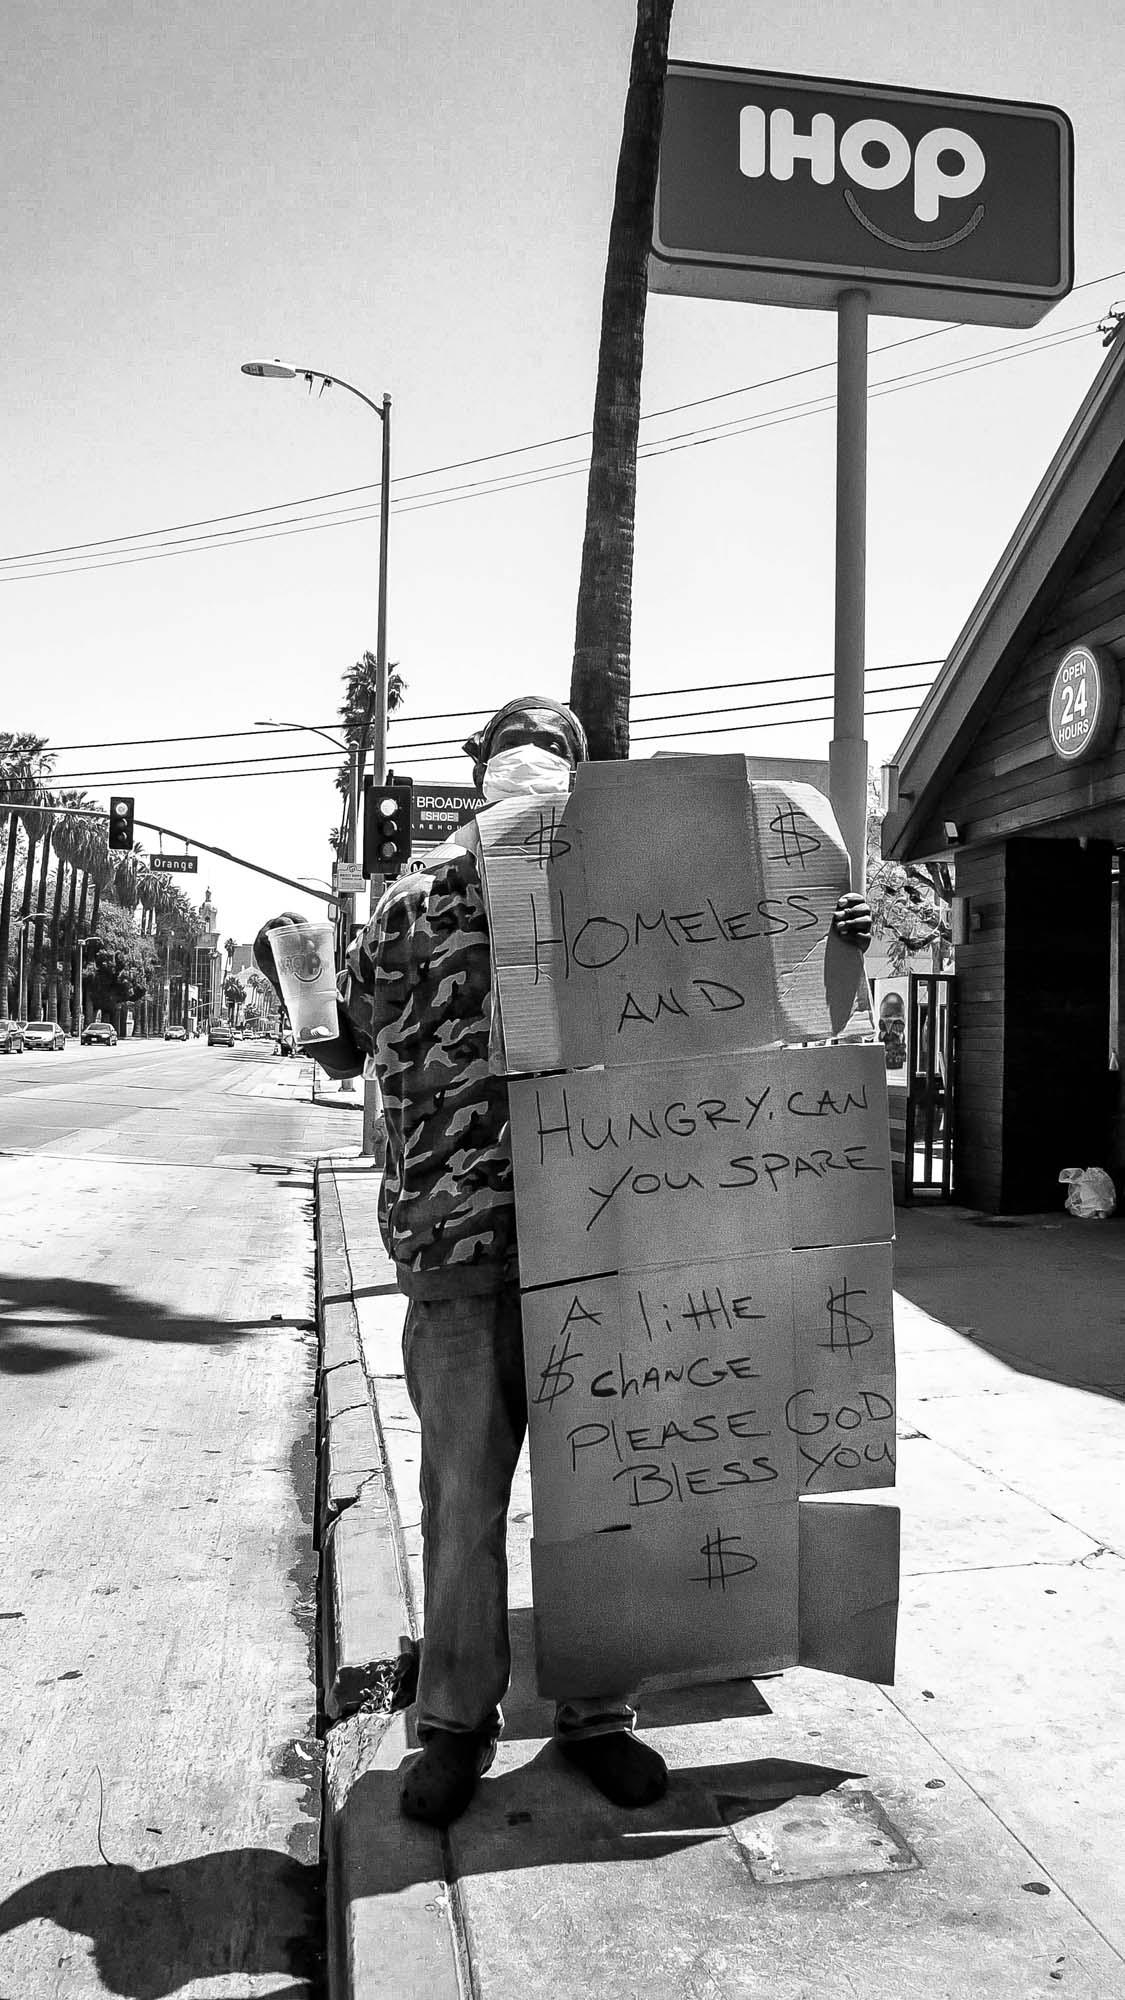 I met Ray in Hollywood while he was panhandling on Sunset Boulevard. I asked him if I could take a photo of him for five bucks. He said, “What’s it for?” I replied it was my hustle. He said, “Say no more.”